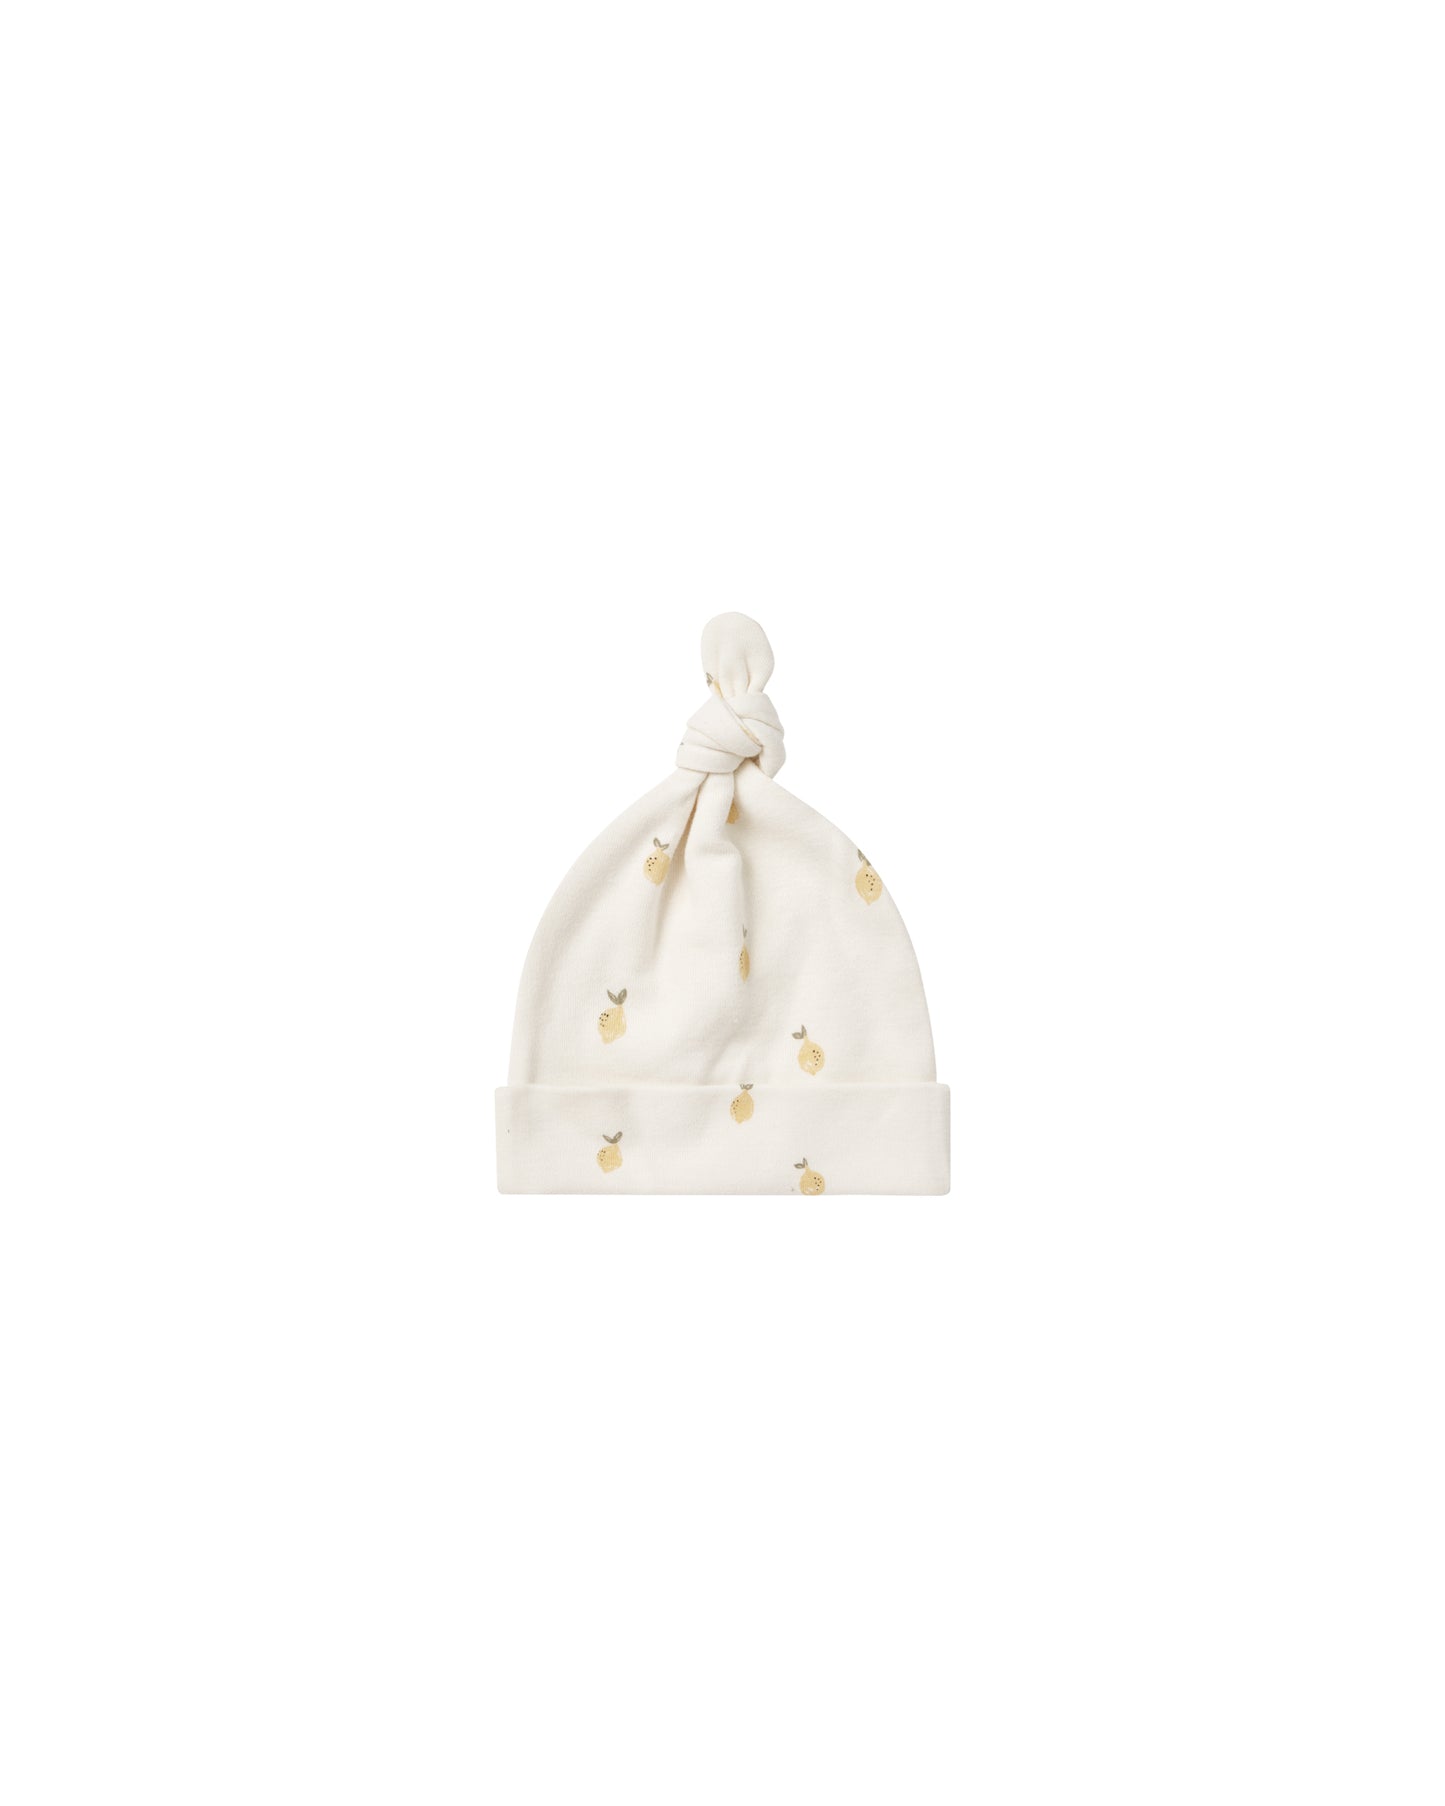 QUINCY MAE KNOTTED BABY HAT || LEMONS